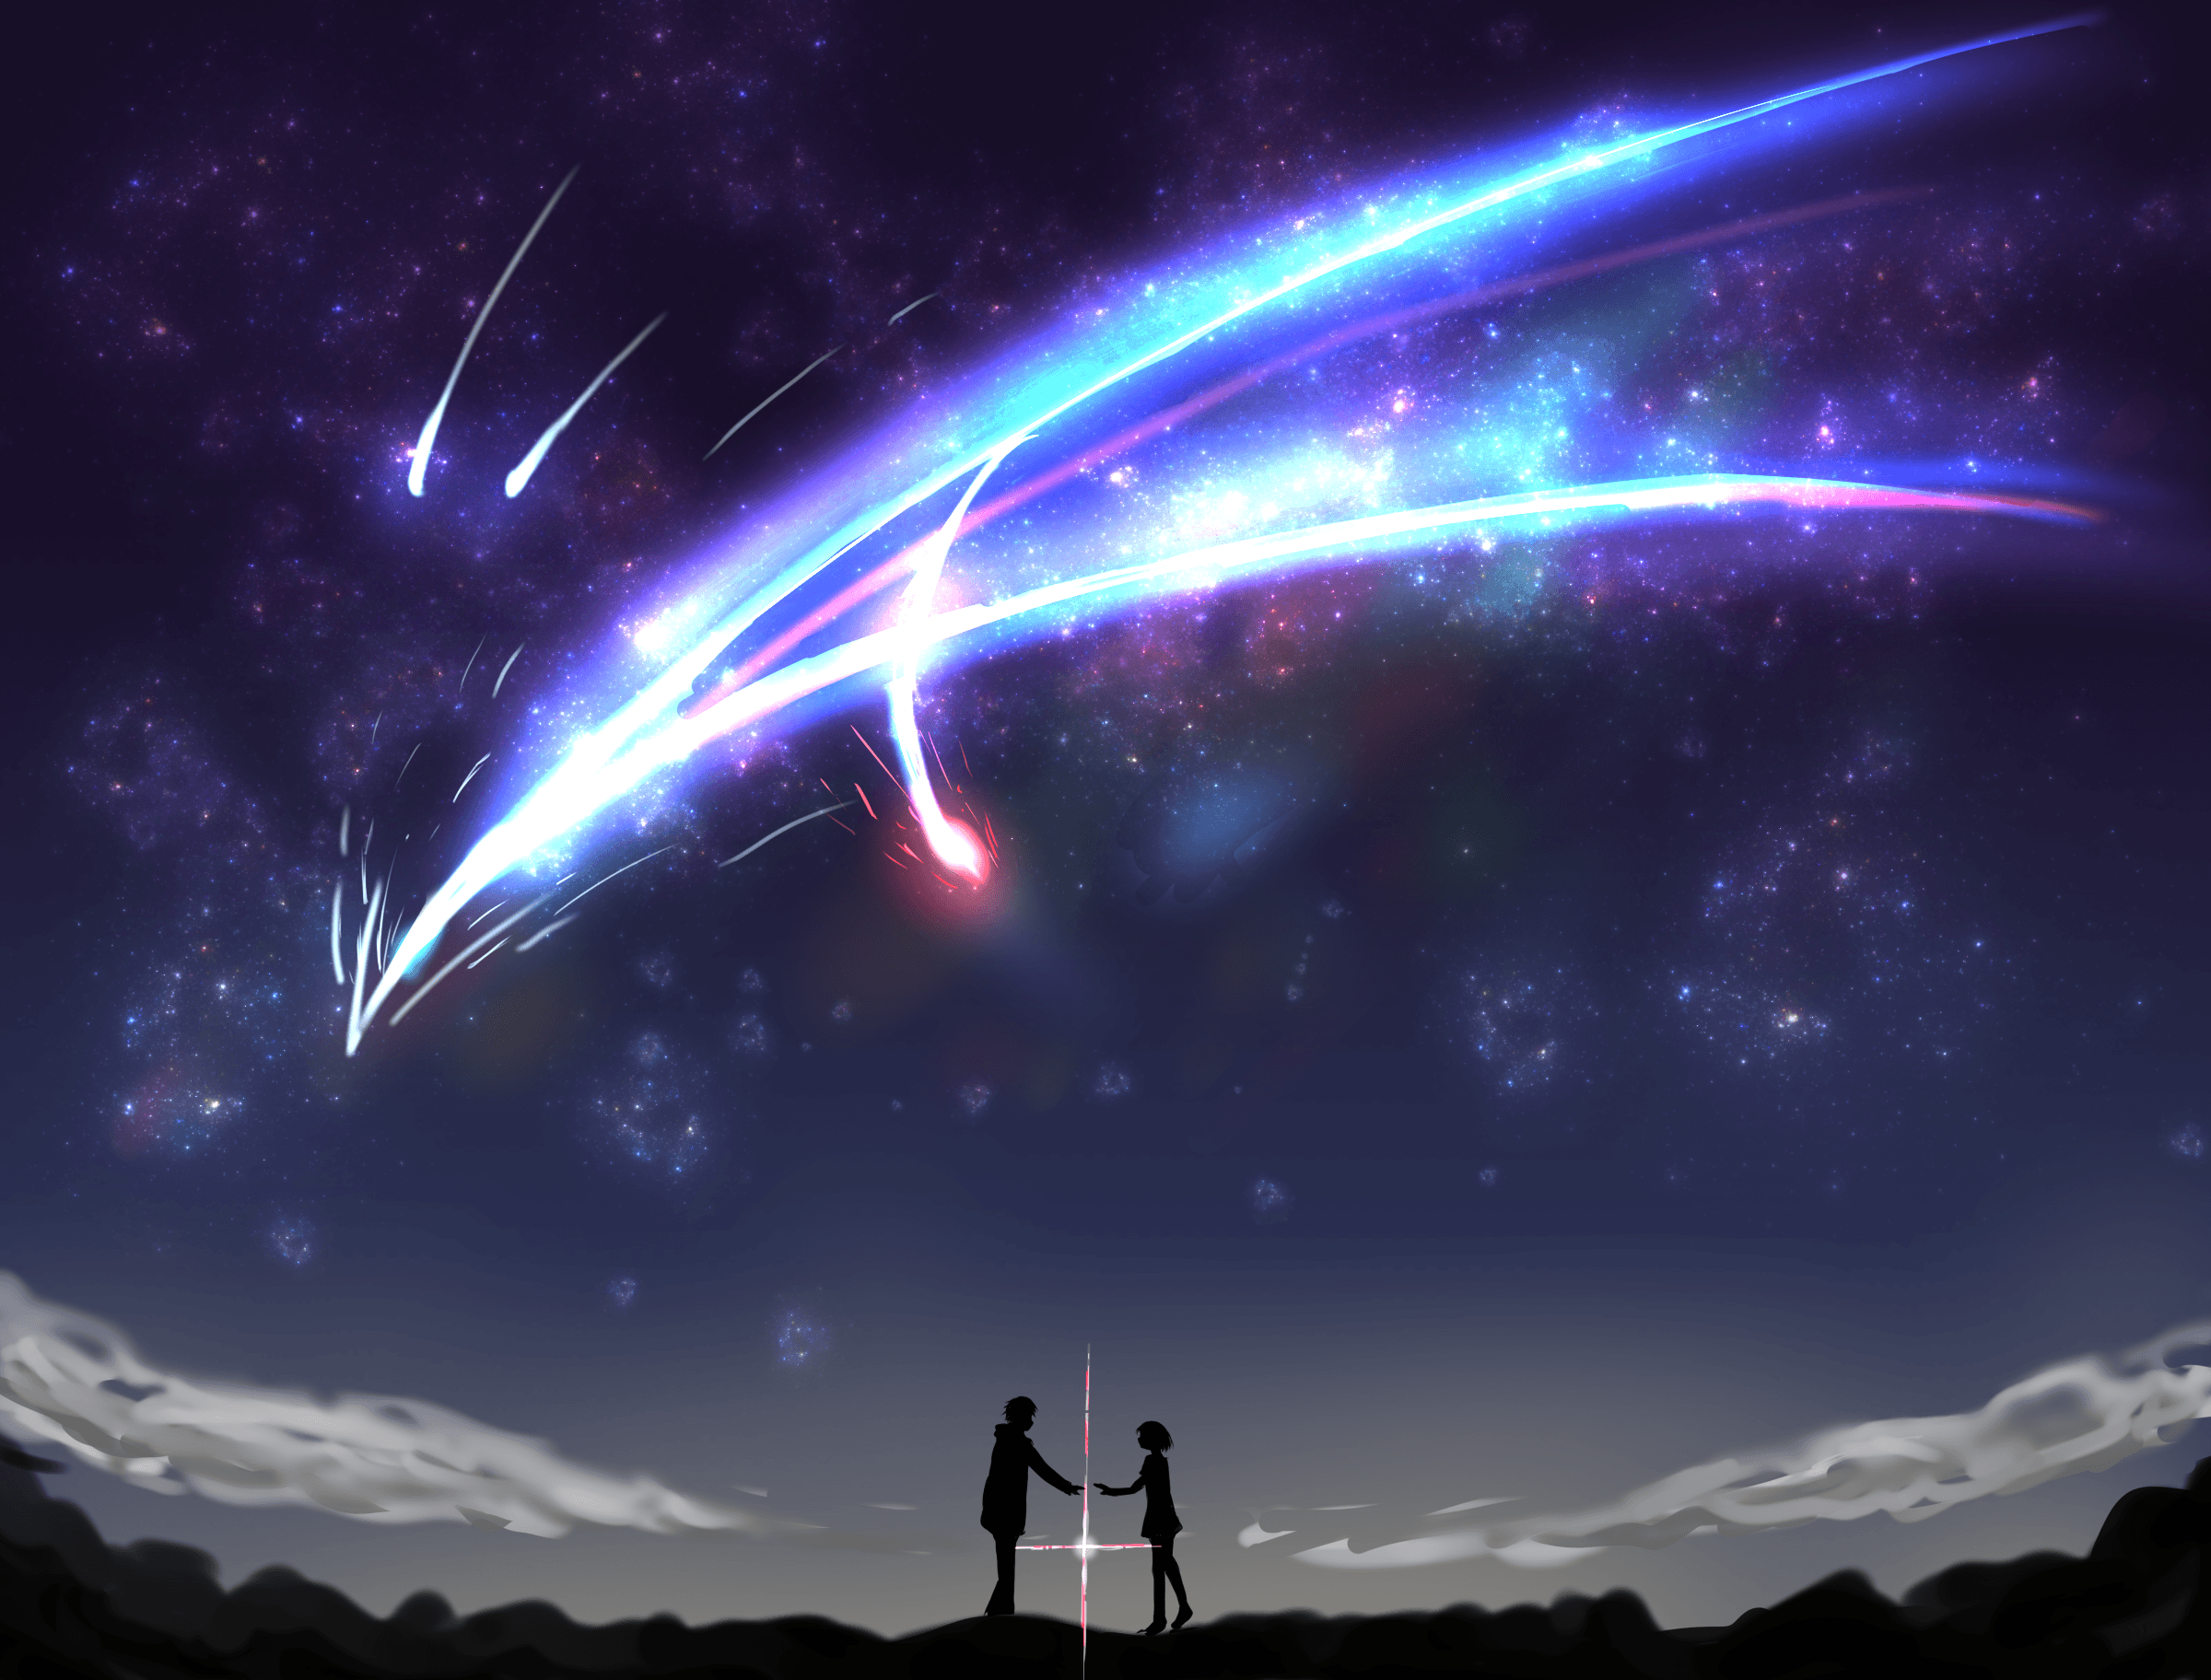 Your Name Anime Landscape Wallpaper Free Your Name Anime